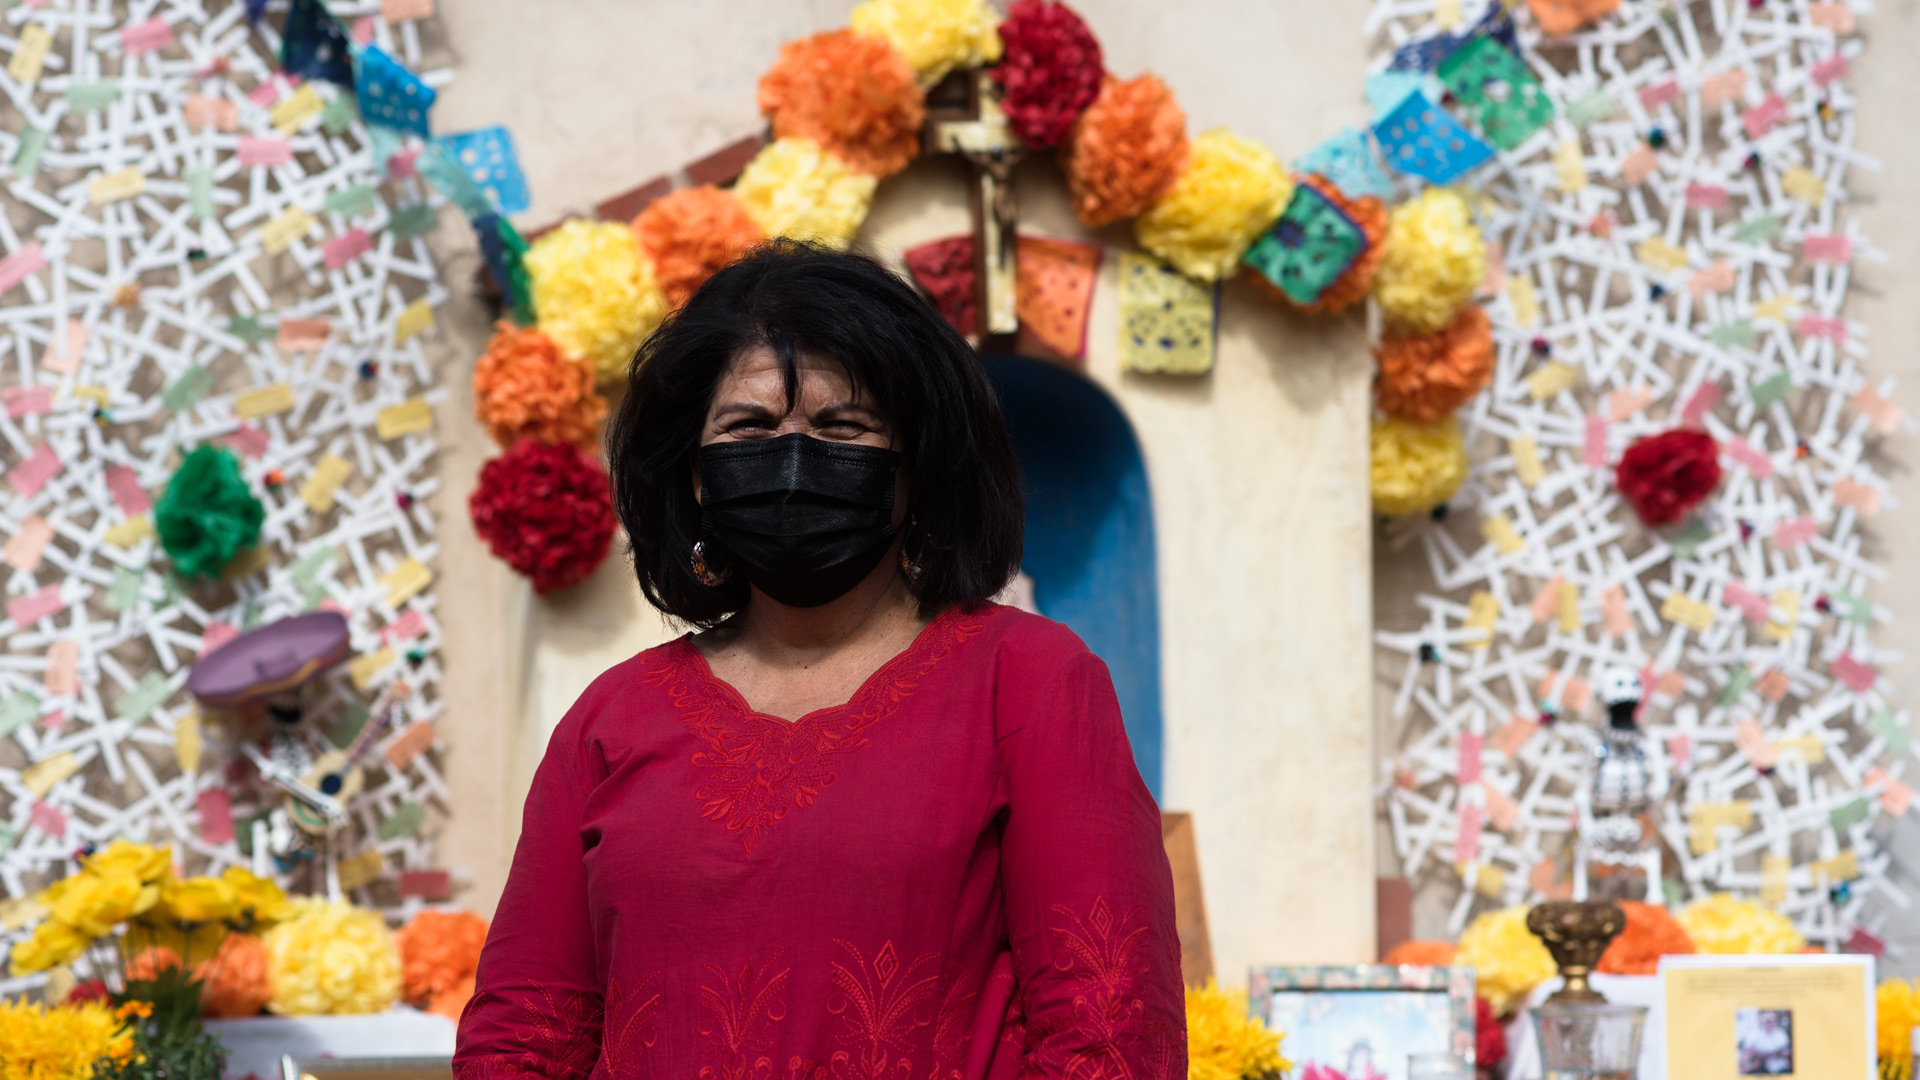 Betty Villegas stands in front of the Dia de los Muertos shrine at the Sosa Carillo house in barrio libre.